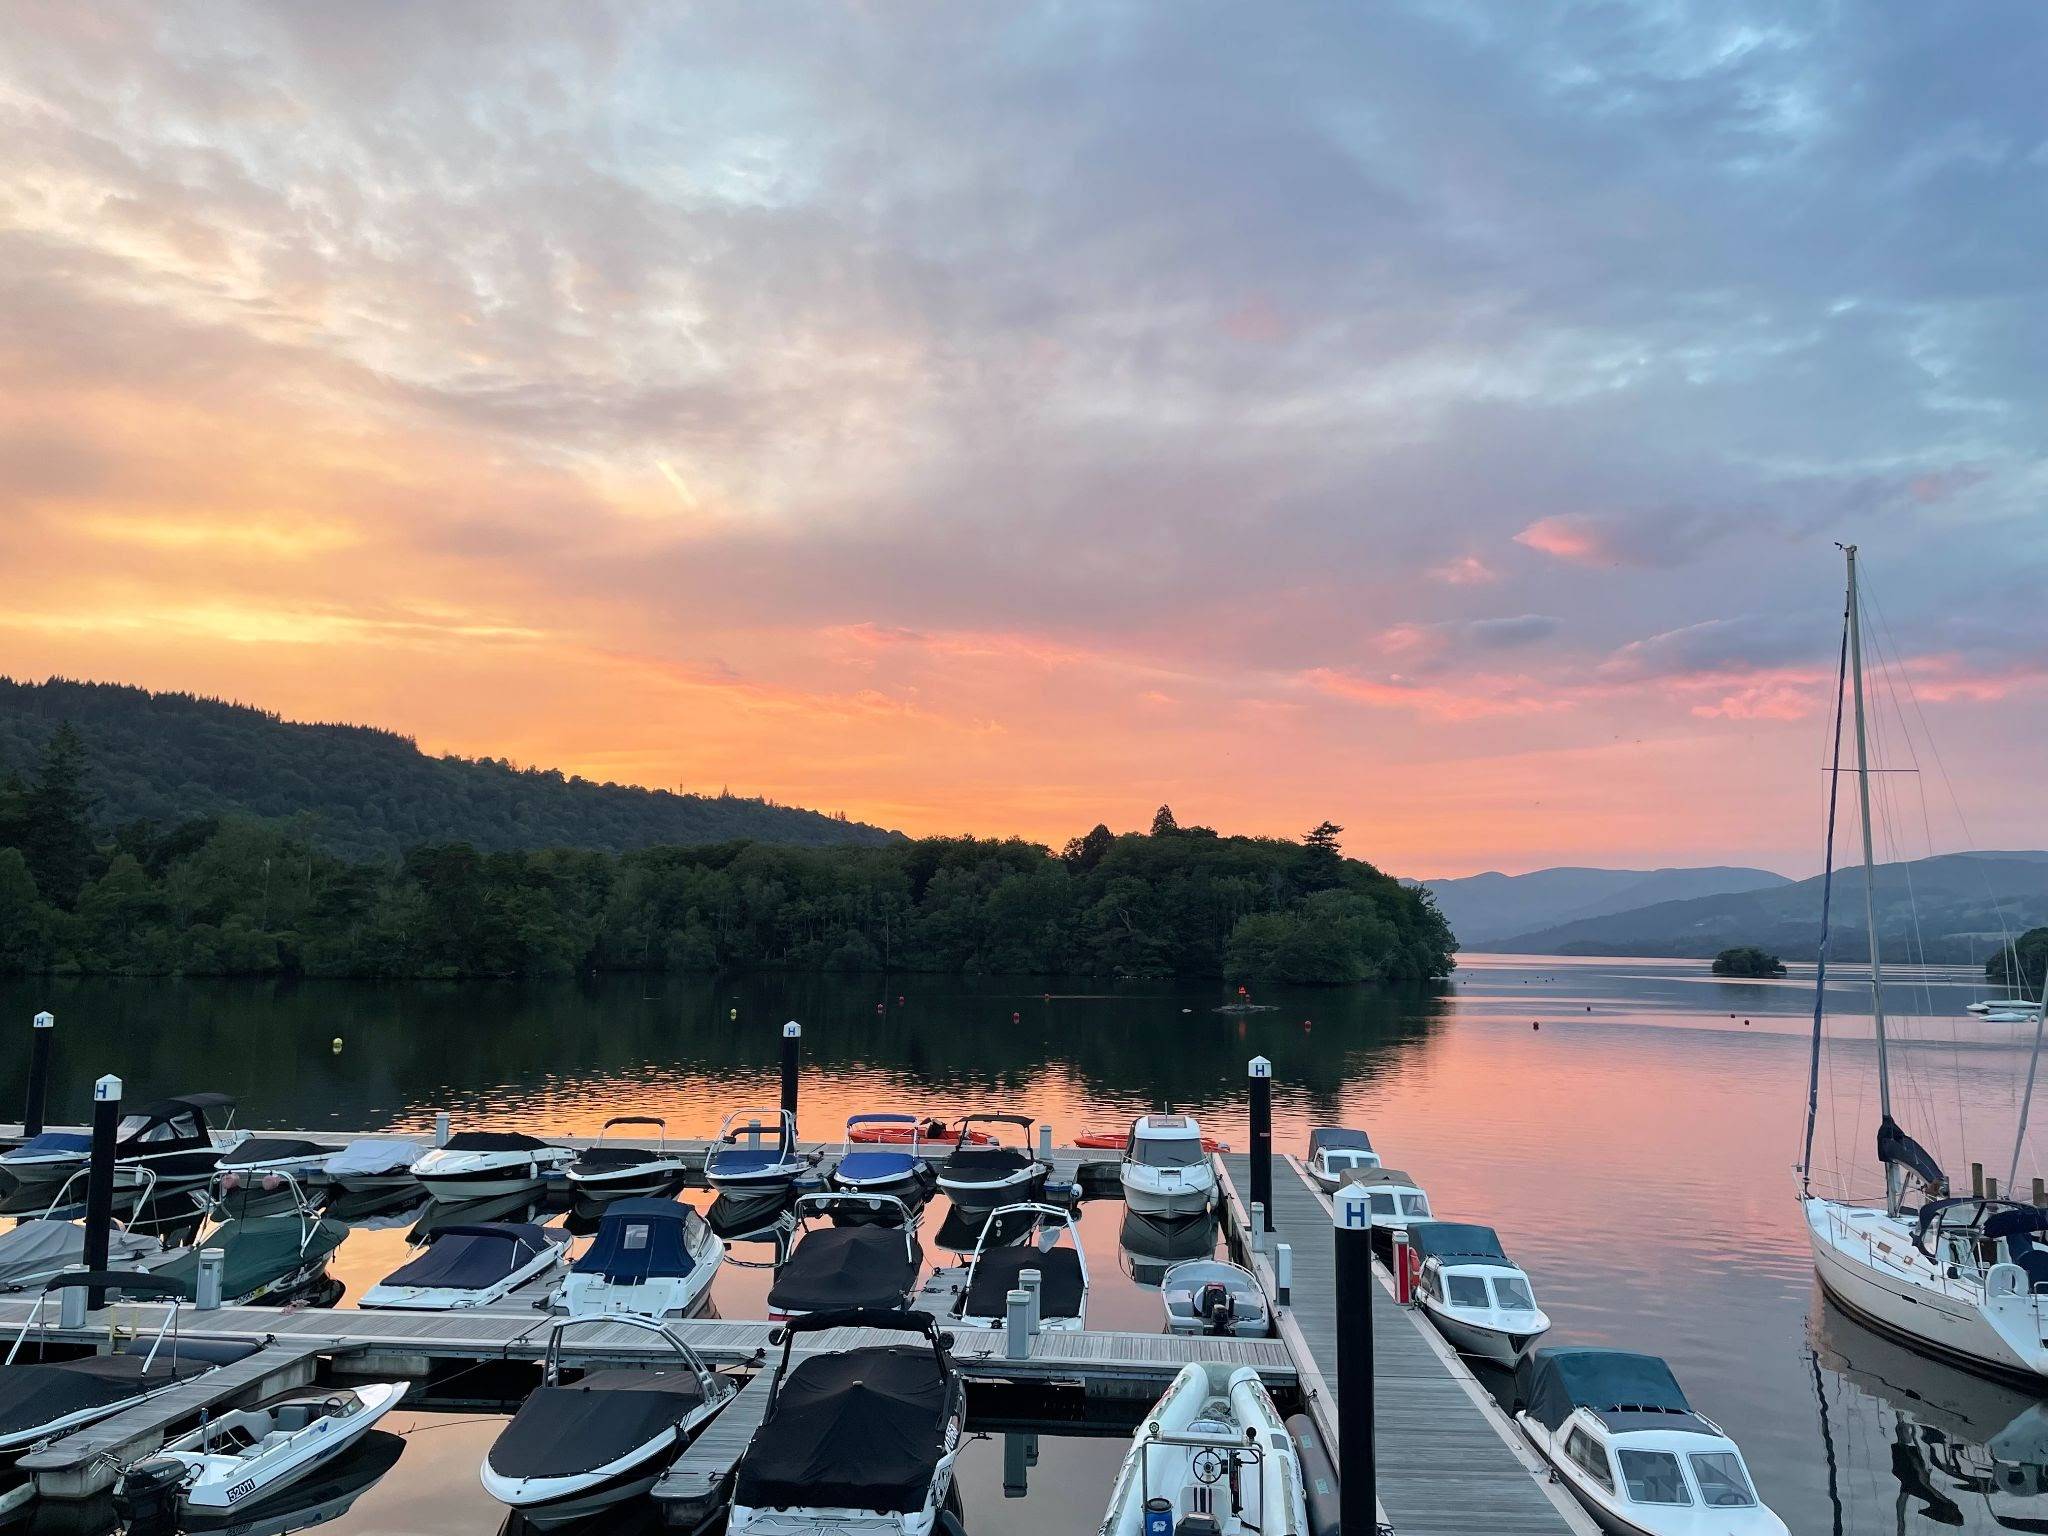 Sunset over a busy Windermere jetty. June 28, 2021.